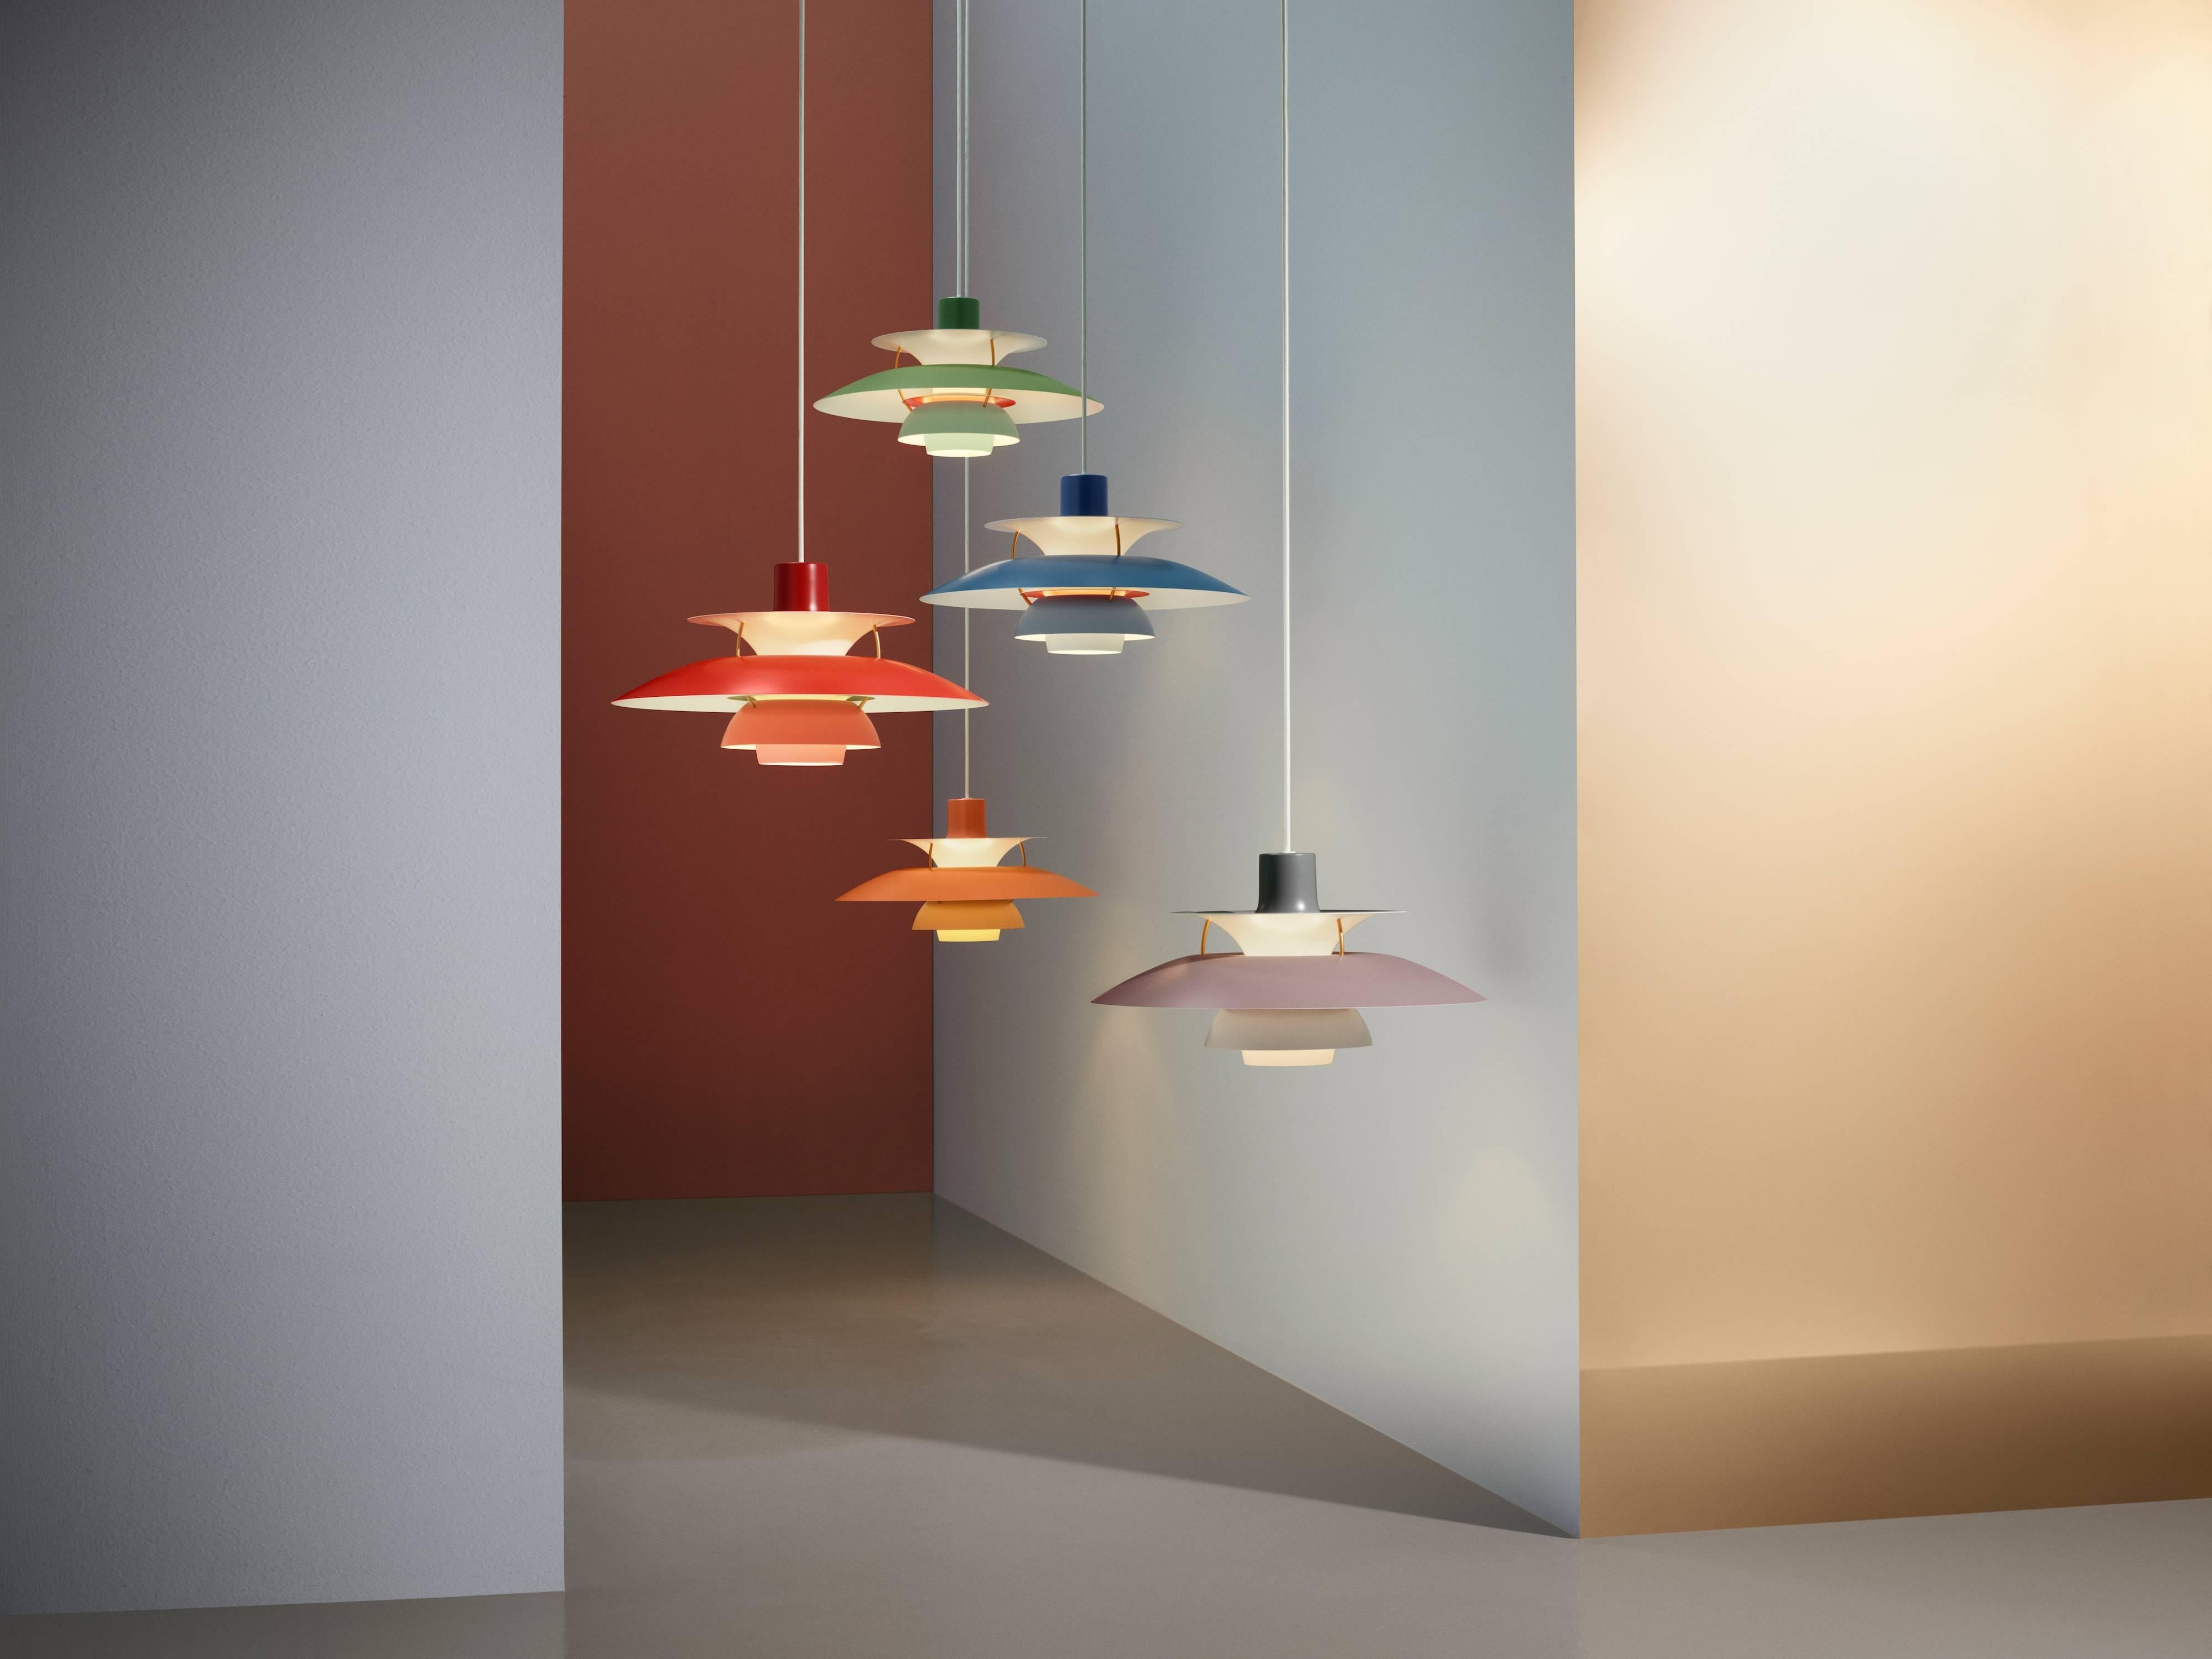 Poul Henningsen PH 5 pendant for Louis Poulsen in red. Poul Henningsen introduced his iconic PH 5 pendant light in 1958. Six decades later, the PH 5 remains the bestselling design in the Louis Poulsen's portfolio. The PH 5's painted metal shades